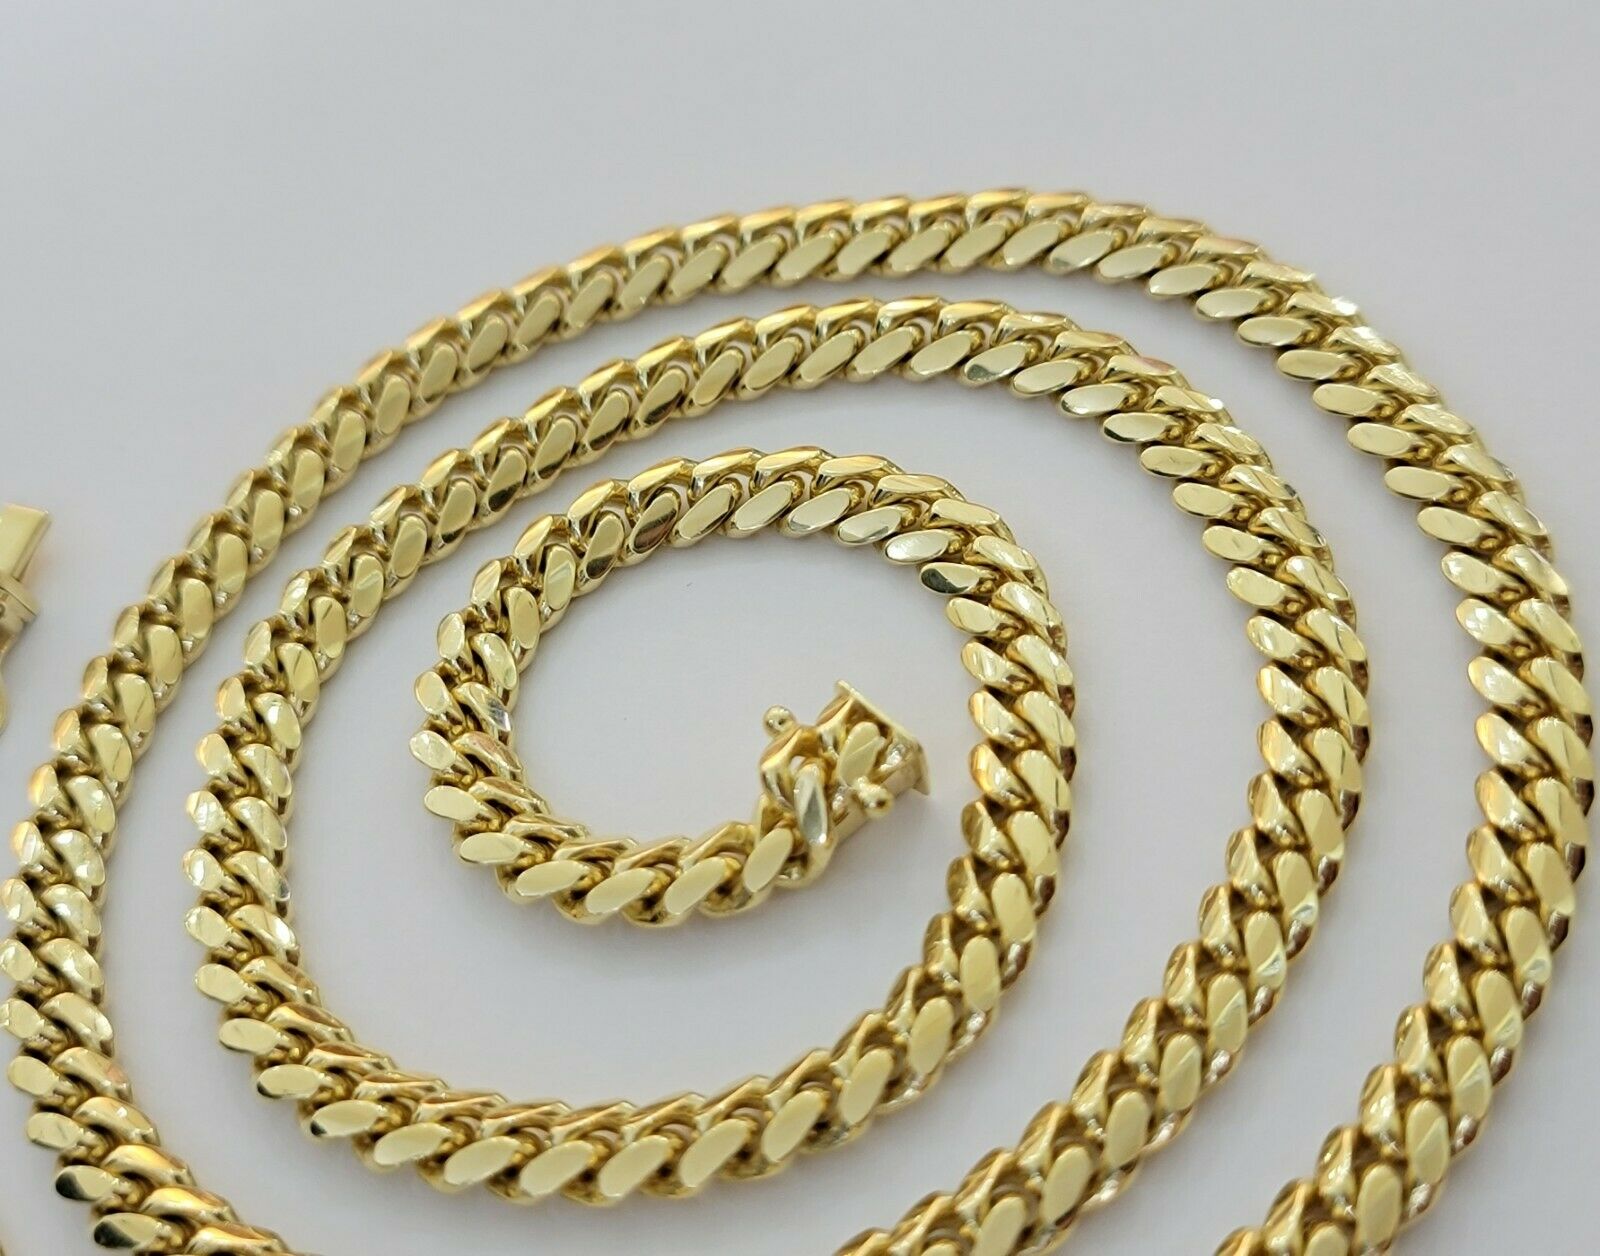 20mm 24” Miami Cuban Link Chain Plated With Real Gold 14k On